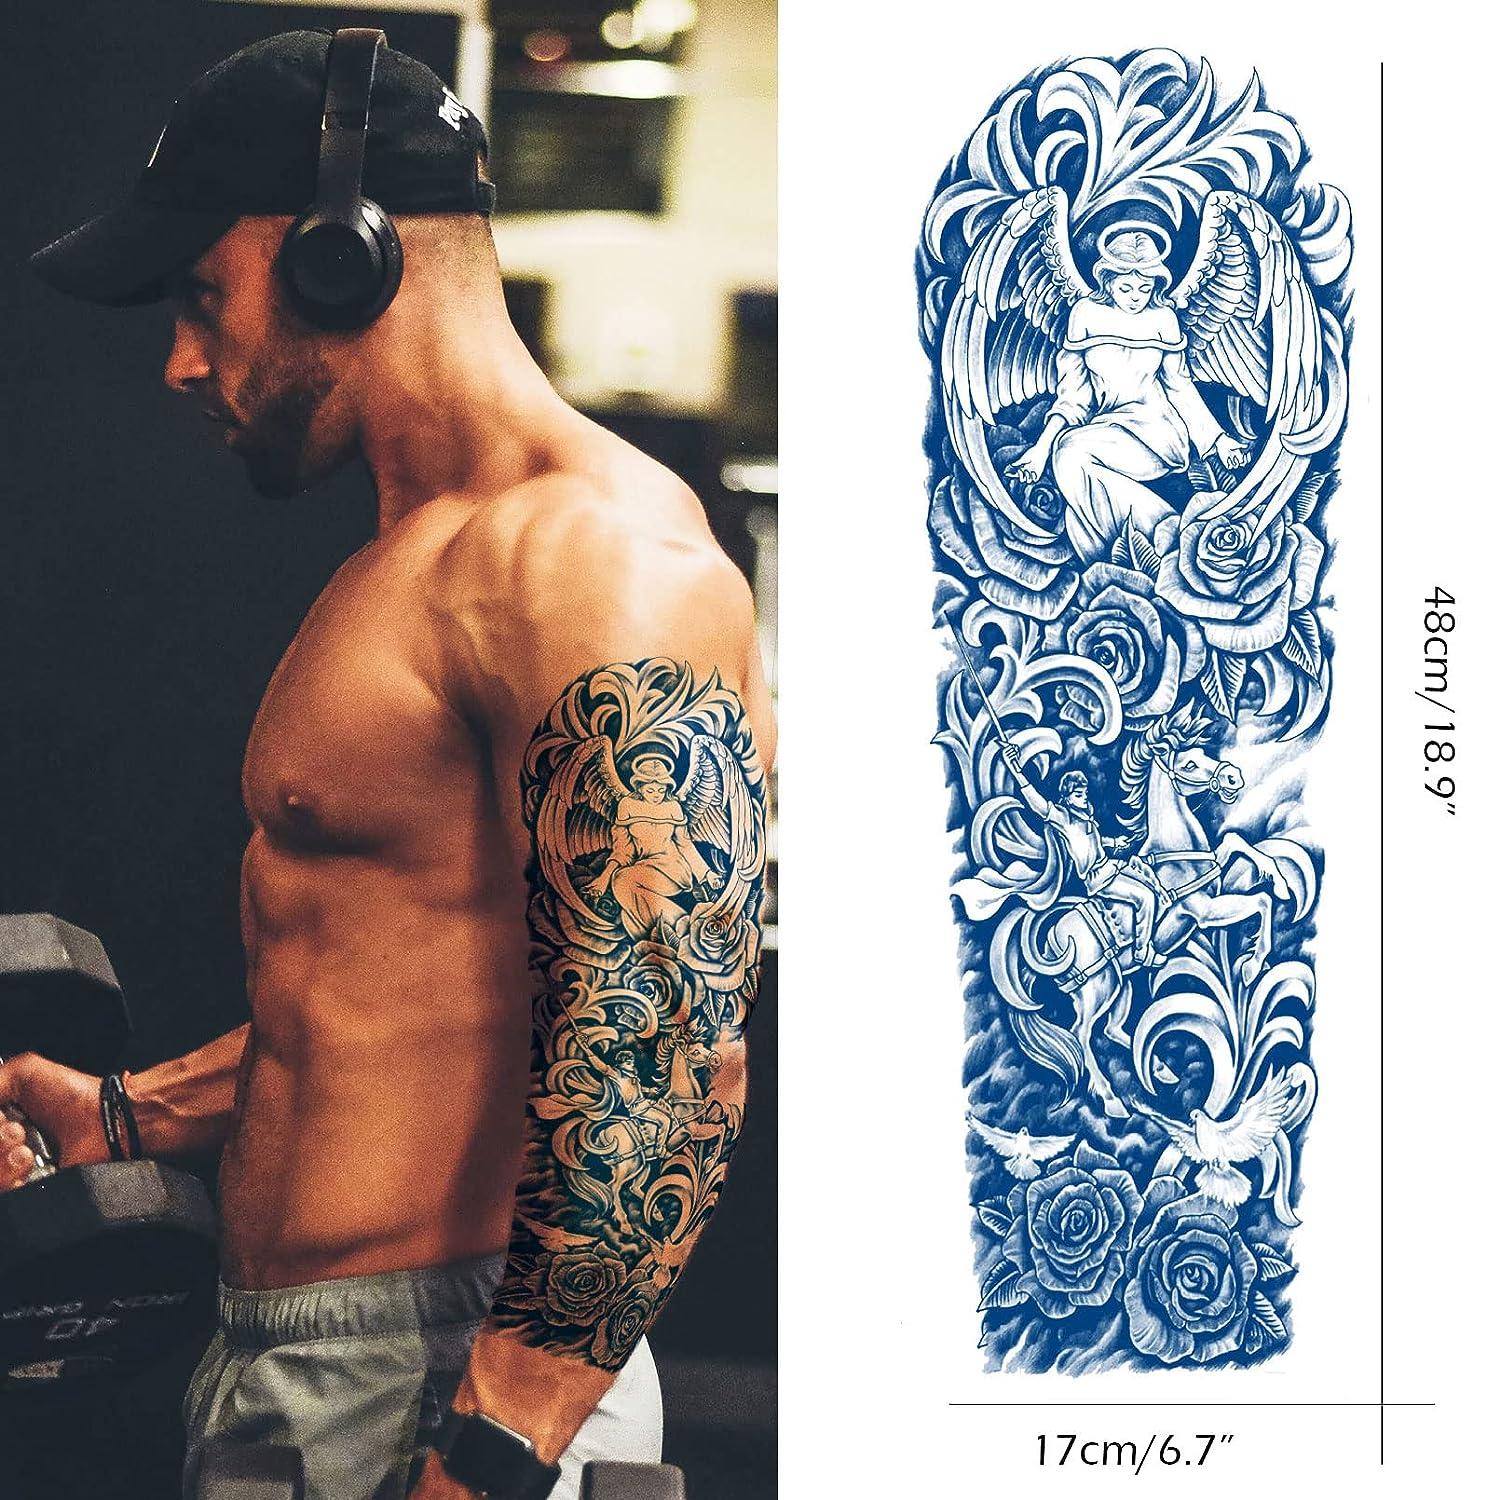 Large Black Full Arm Temporary Tattoo Stickers, Waterproof Fake Sleeve  Tattoos For Men And Women From Lulu_baby, $4.27 | DHgate.Com